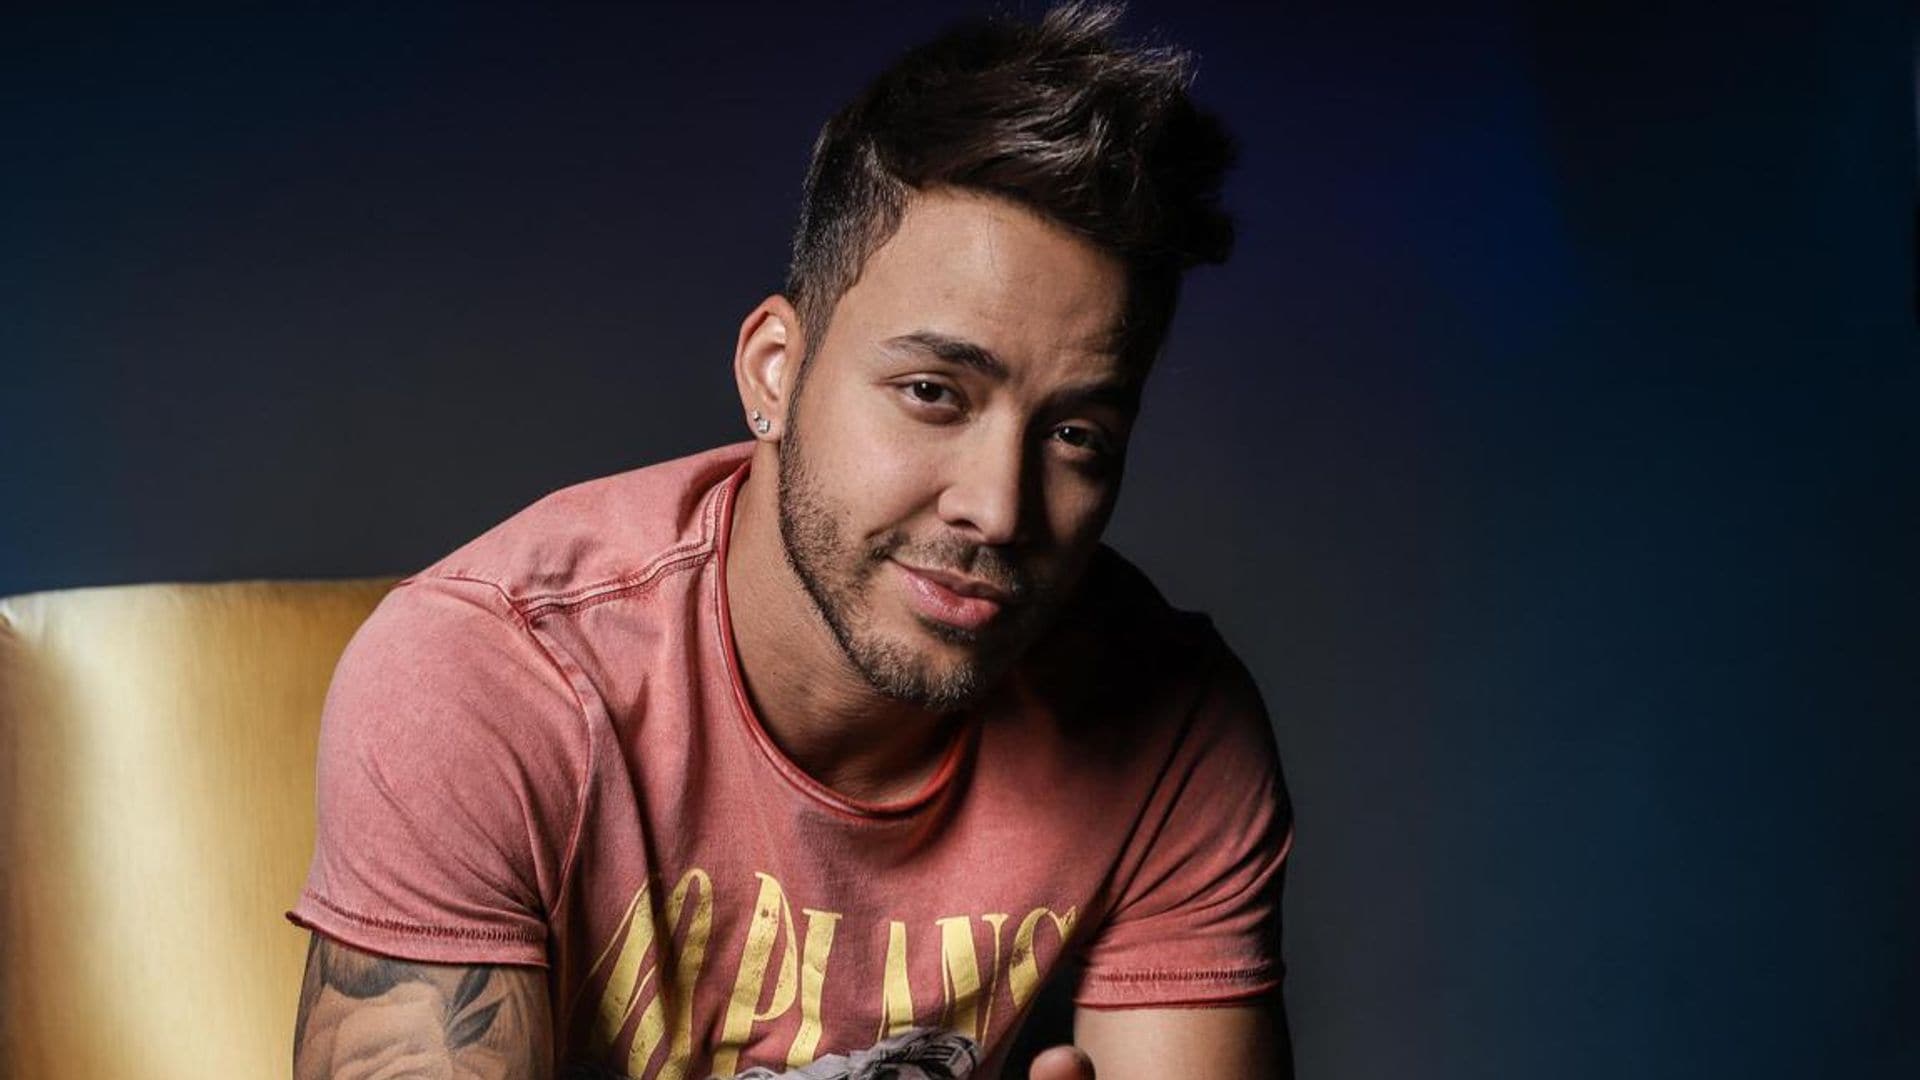 Prince Royce tests positive for COVID-19 and urges fans to stay home in powerful video